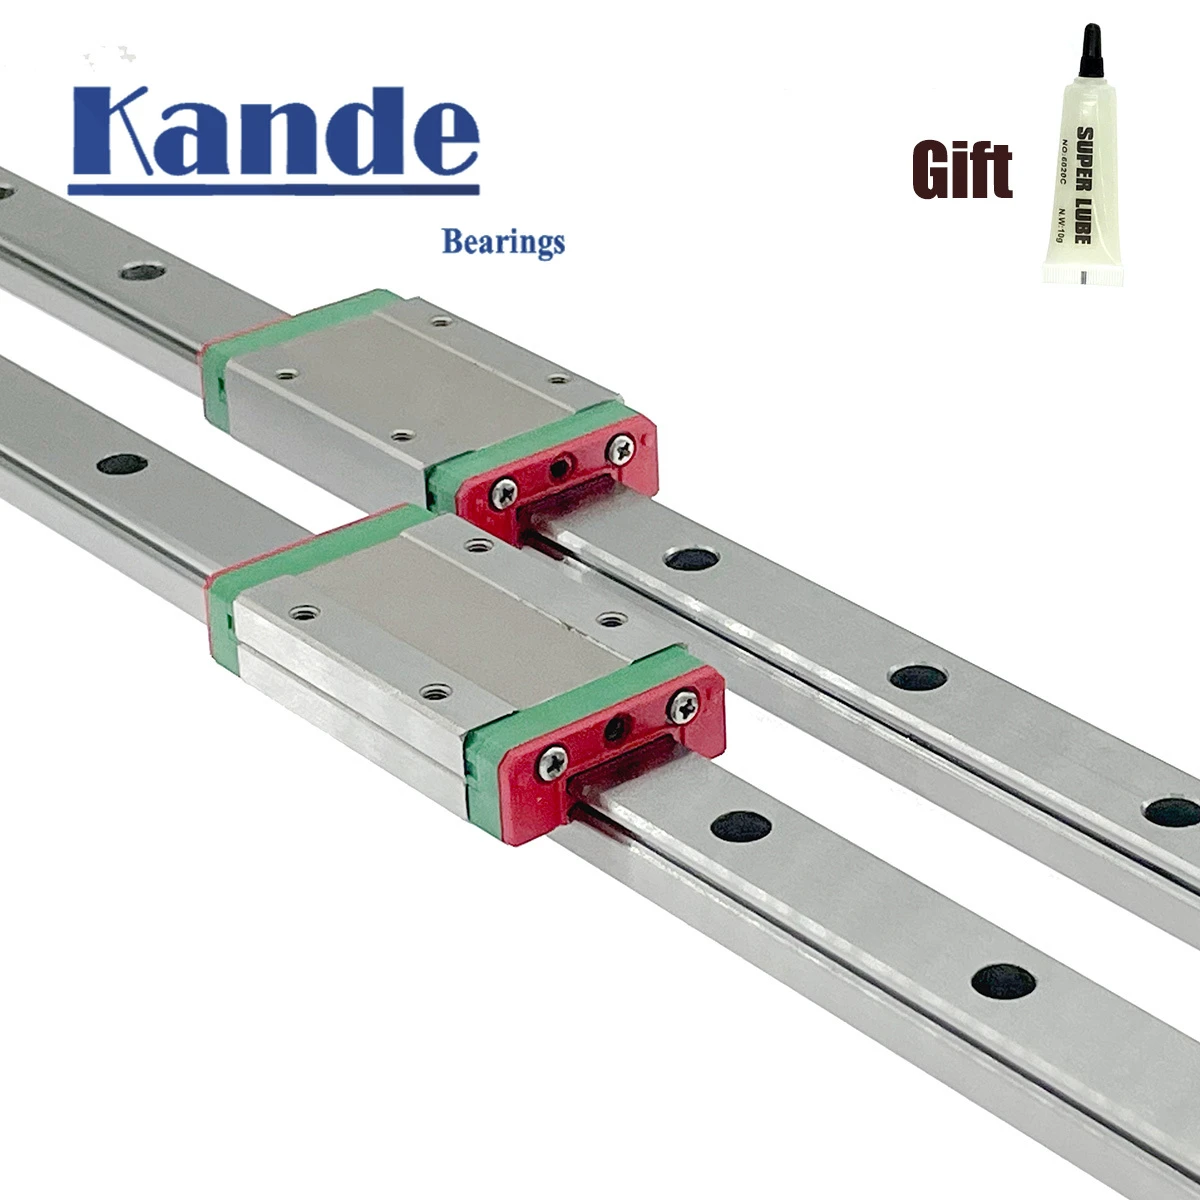 New MGN12 12mm Linear Rail Guide Length 250mm Rail With MGN12C Carriage Cnc Parts 3D Printer